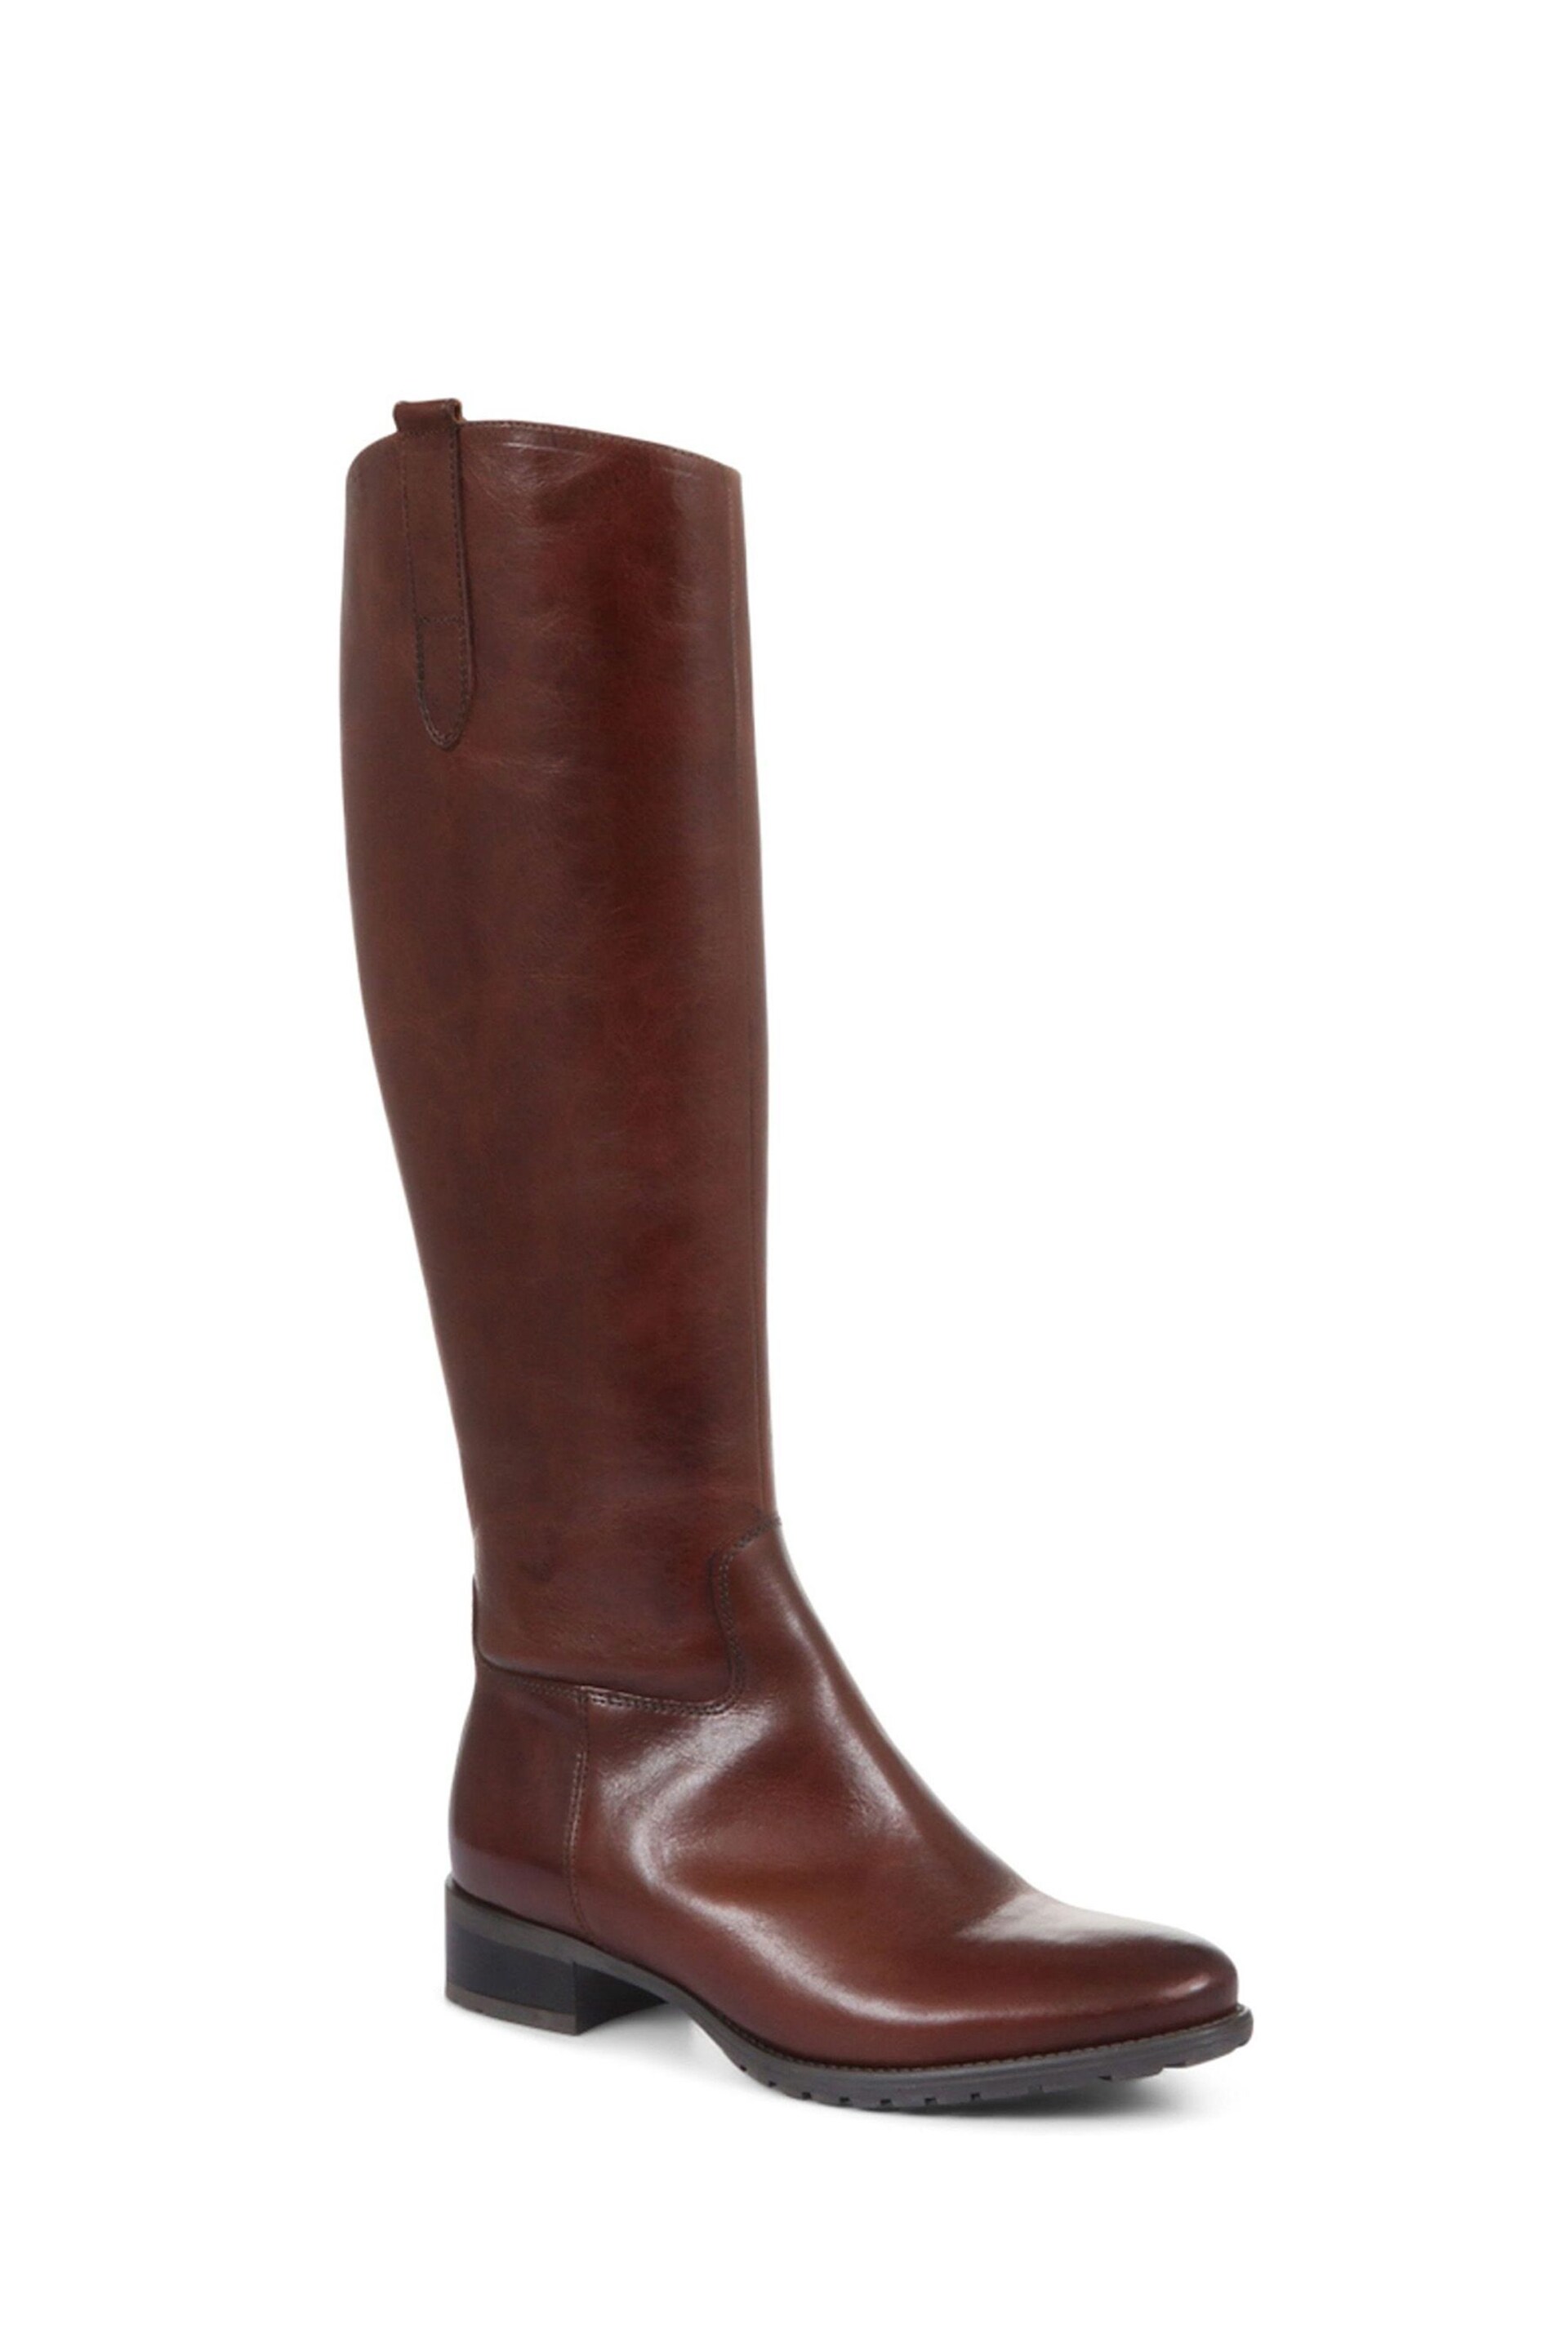 Jones Bootmaker Womens Cinzia Brown Leather Riding Boots - Image 2 of 5